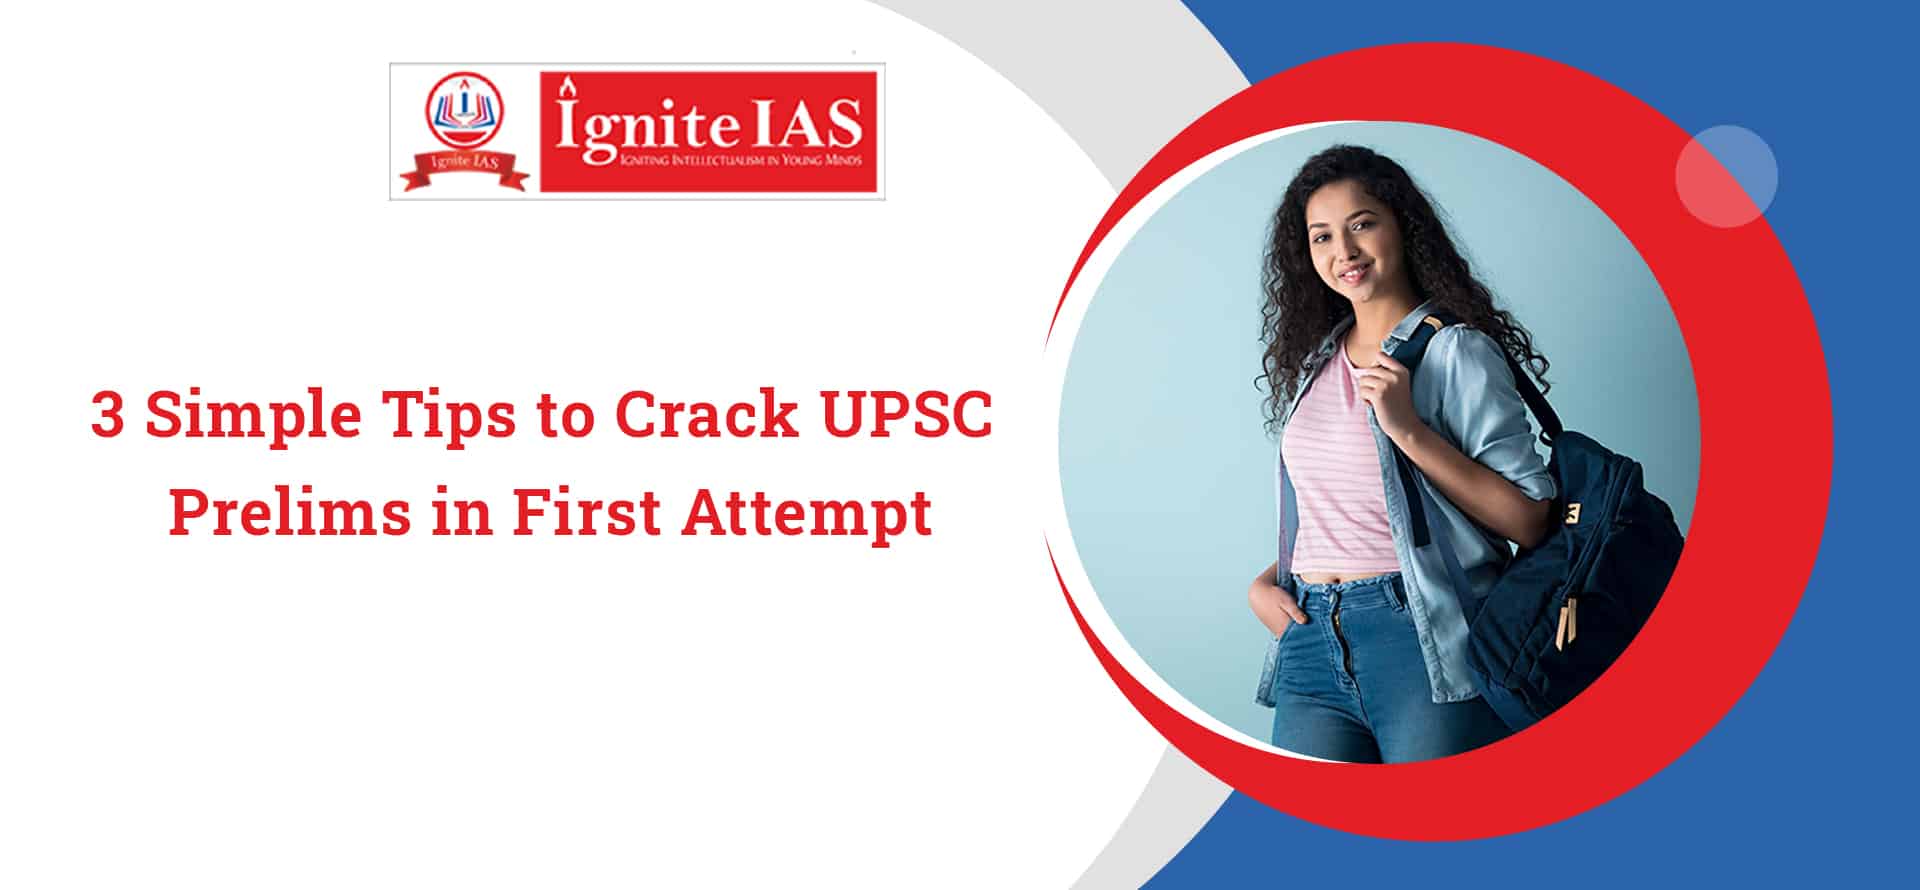 3 Simple Tips to Crack UPSC Prelims in First Attempt